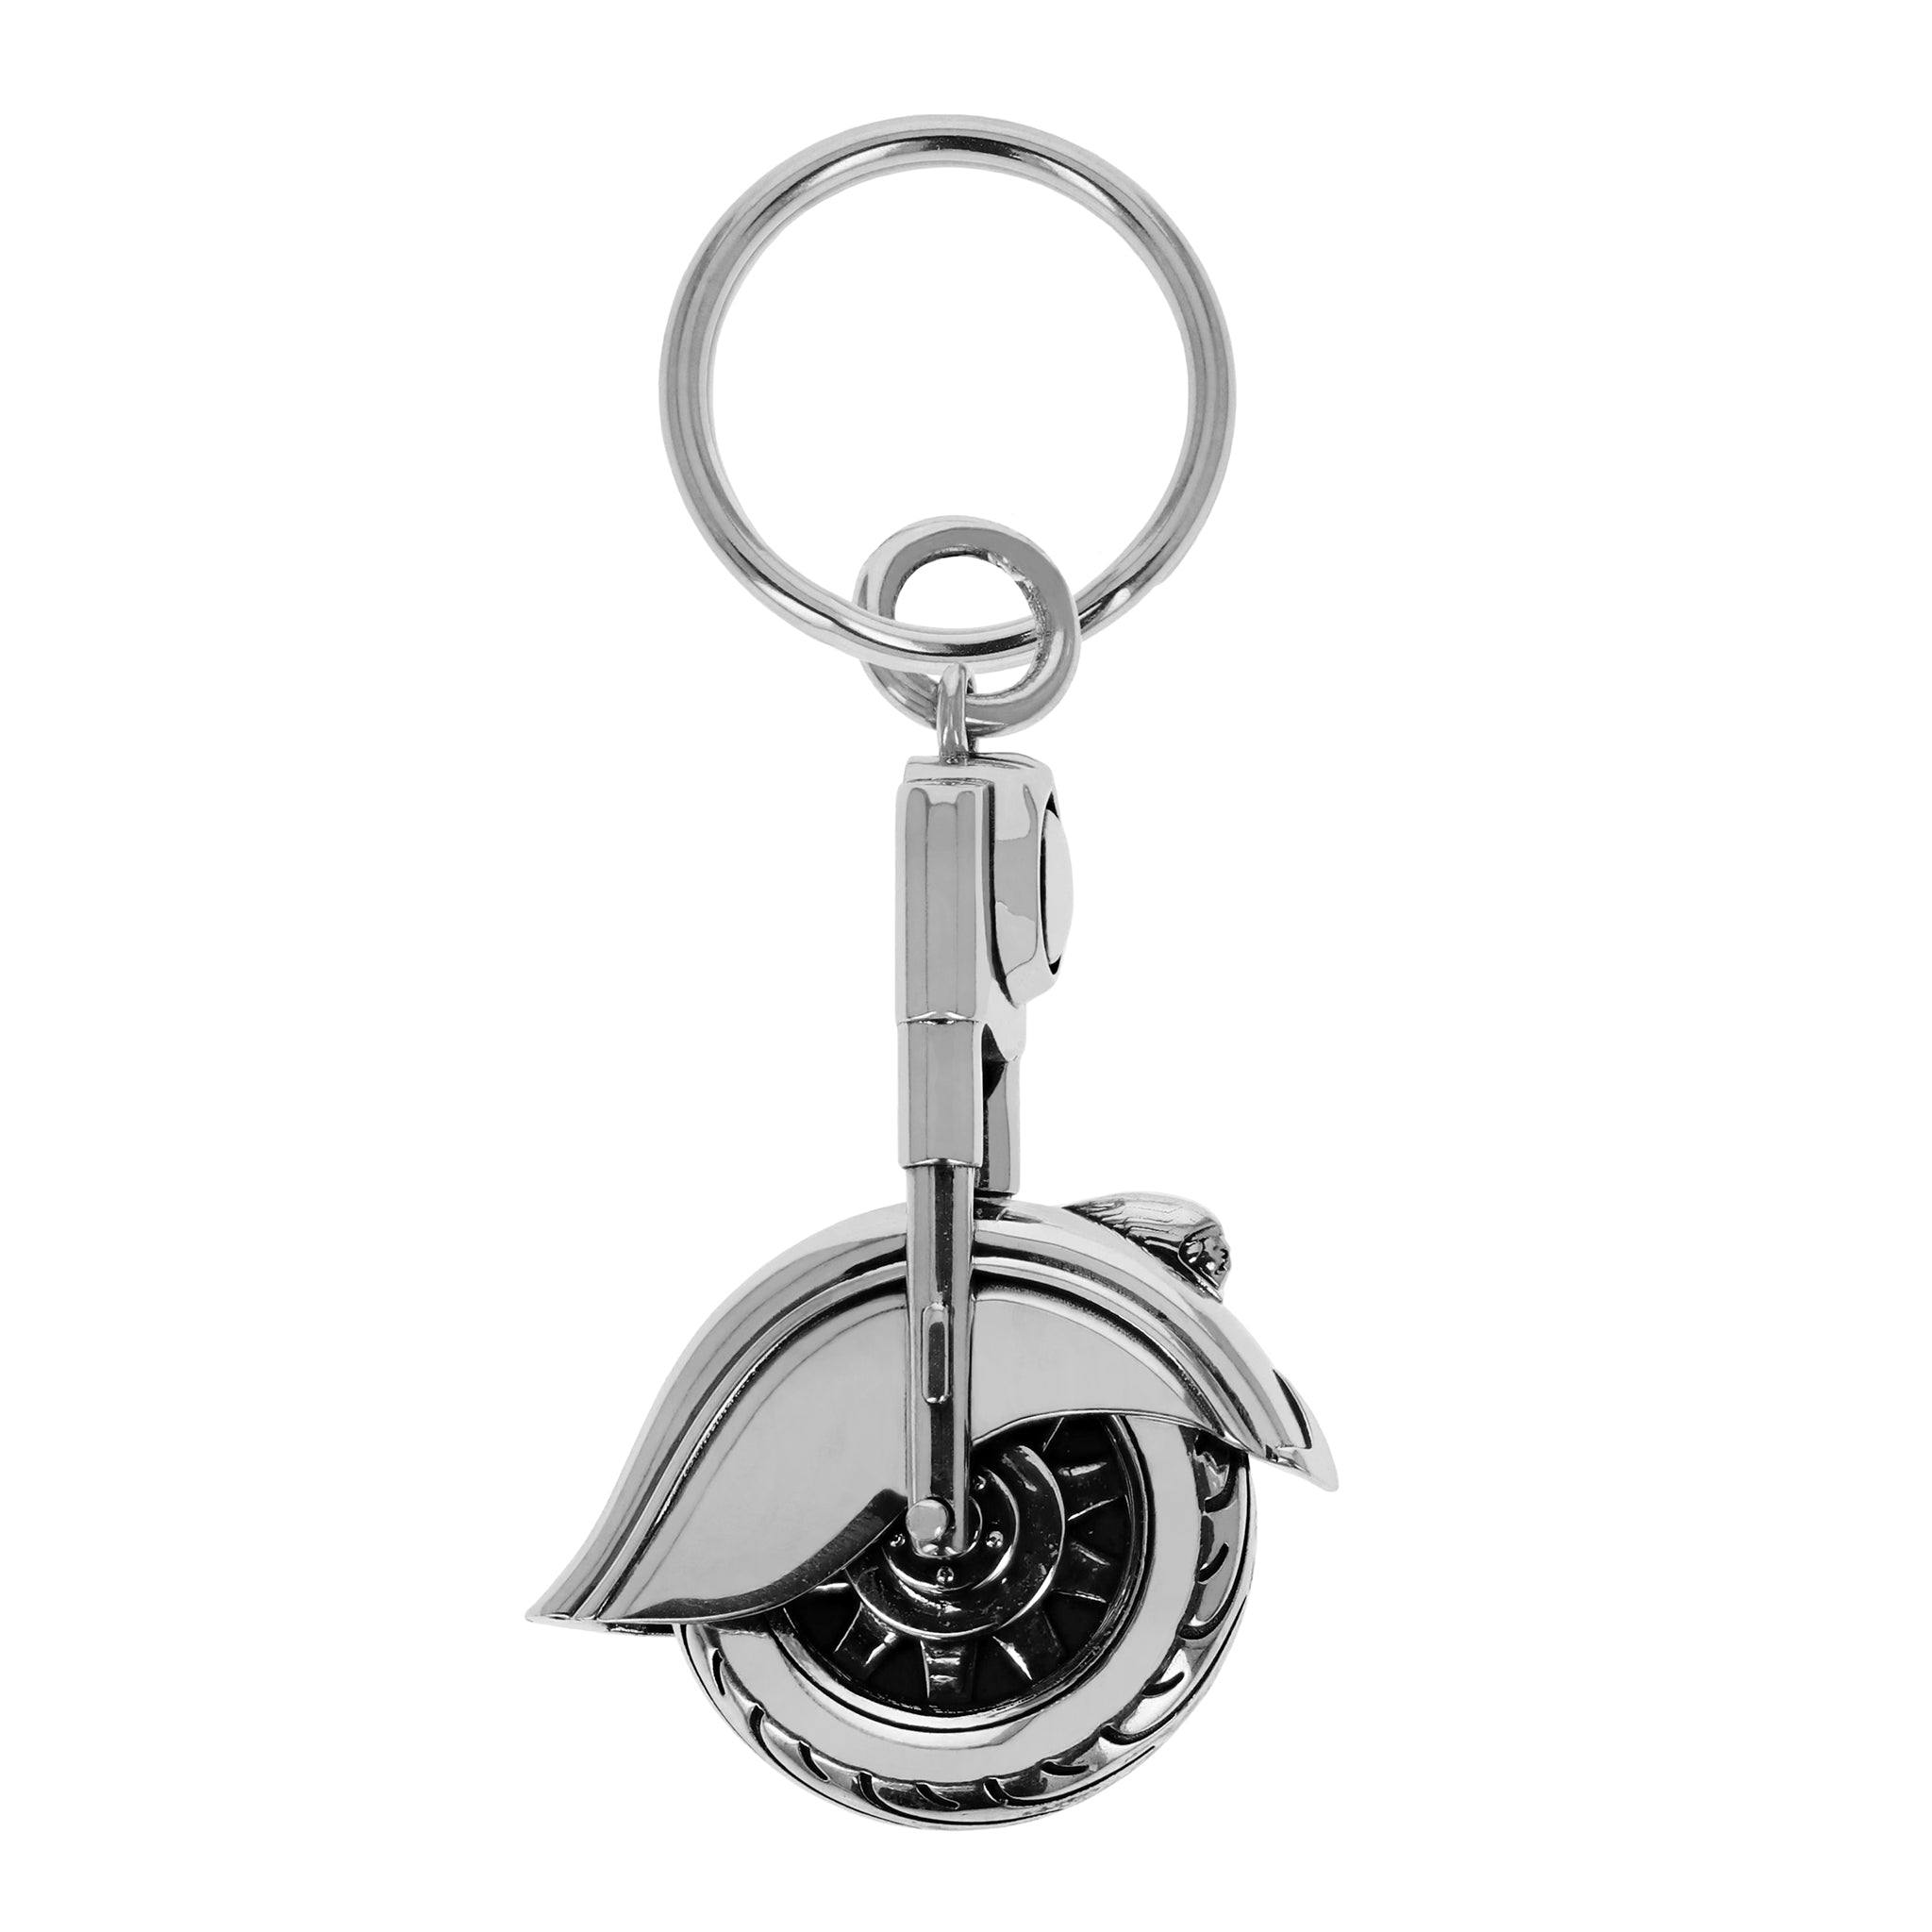 Creative Key Chain Car Keychain Motorcycle keychain Decration Key chain 3D  Motorbike Sportbike Street Bike Ring Car Key Chain Ring for Office Backpack  Purse Charm,Great Gift for Men or Women at Amazon